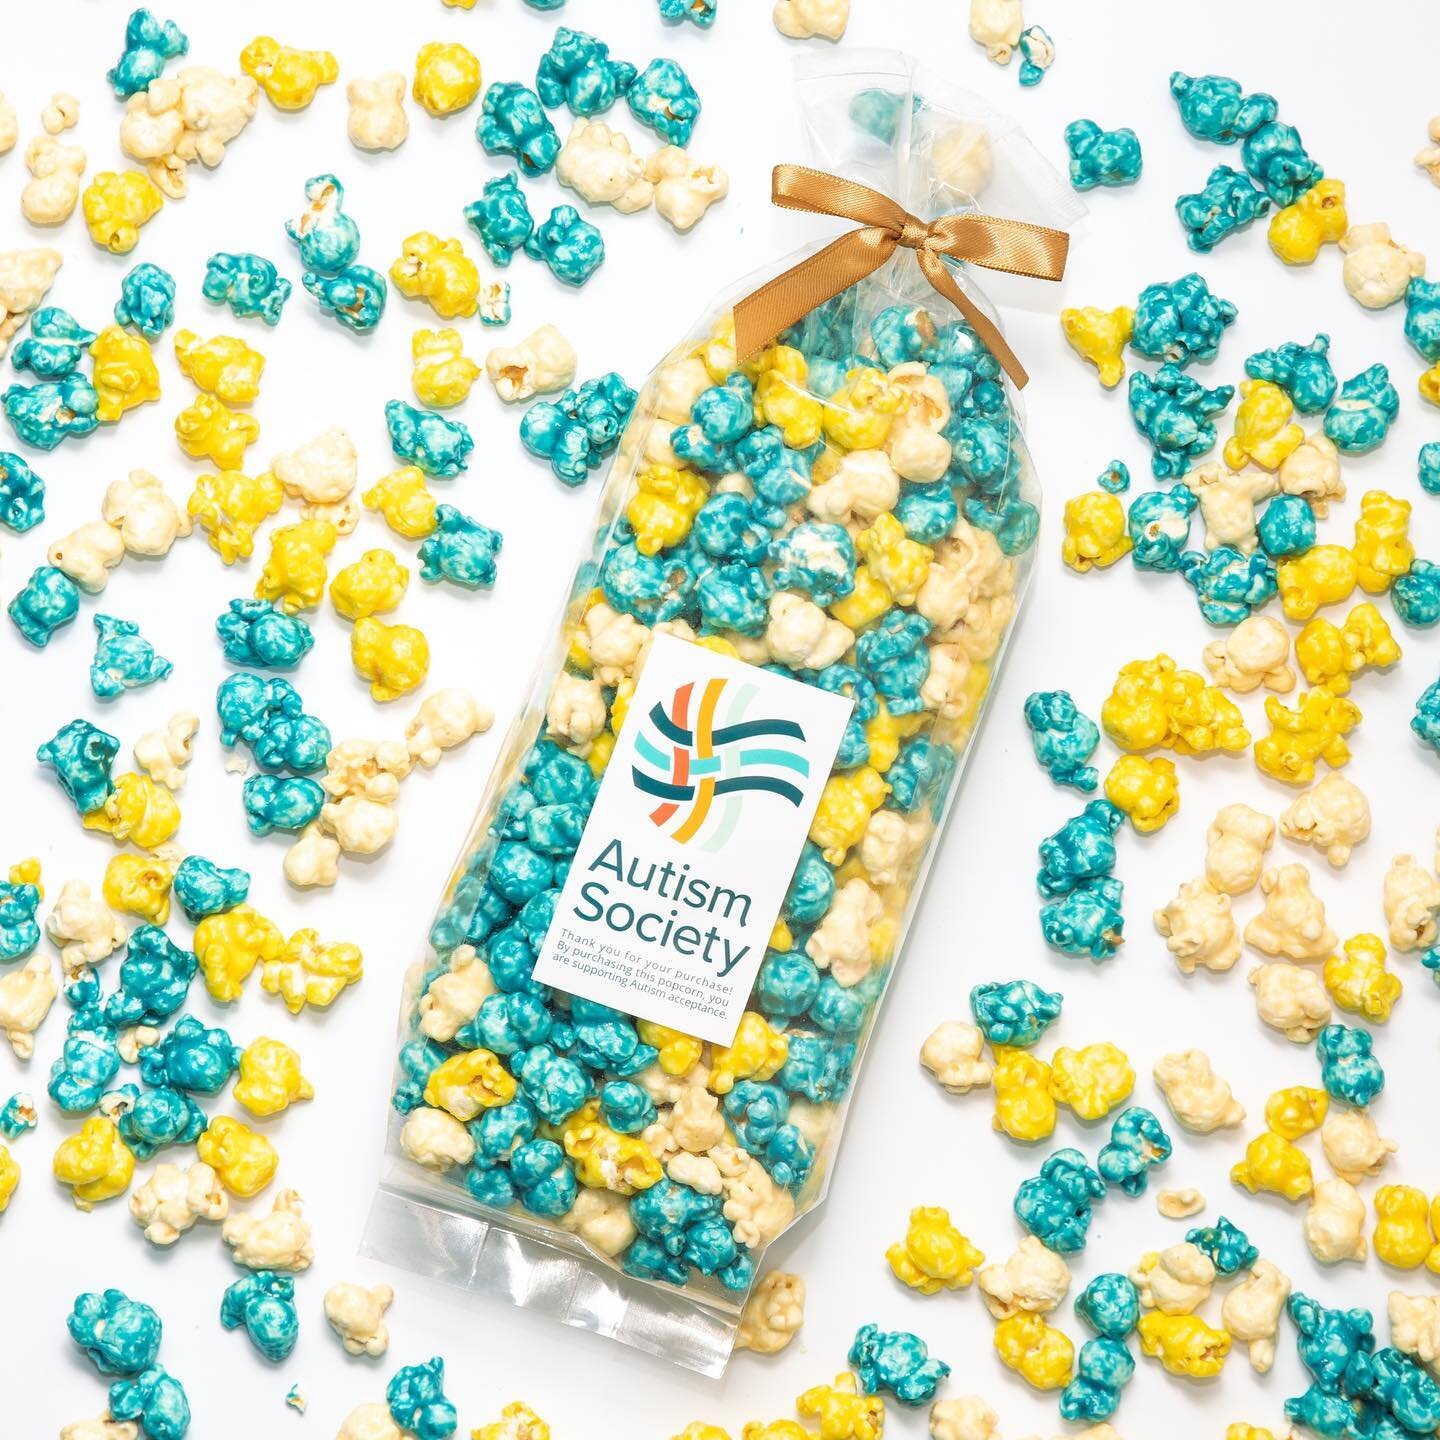 It&rsquo;s Autism Acceptance Day and we&rsquo;ve curated a special gourmet popcorn blend to support autism awareness✨

A bright, fruity blend of blueberry, lemon, and vanilla candied #popcorn 🍿 We think it tastes like #skittles, but give it a try an